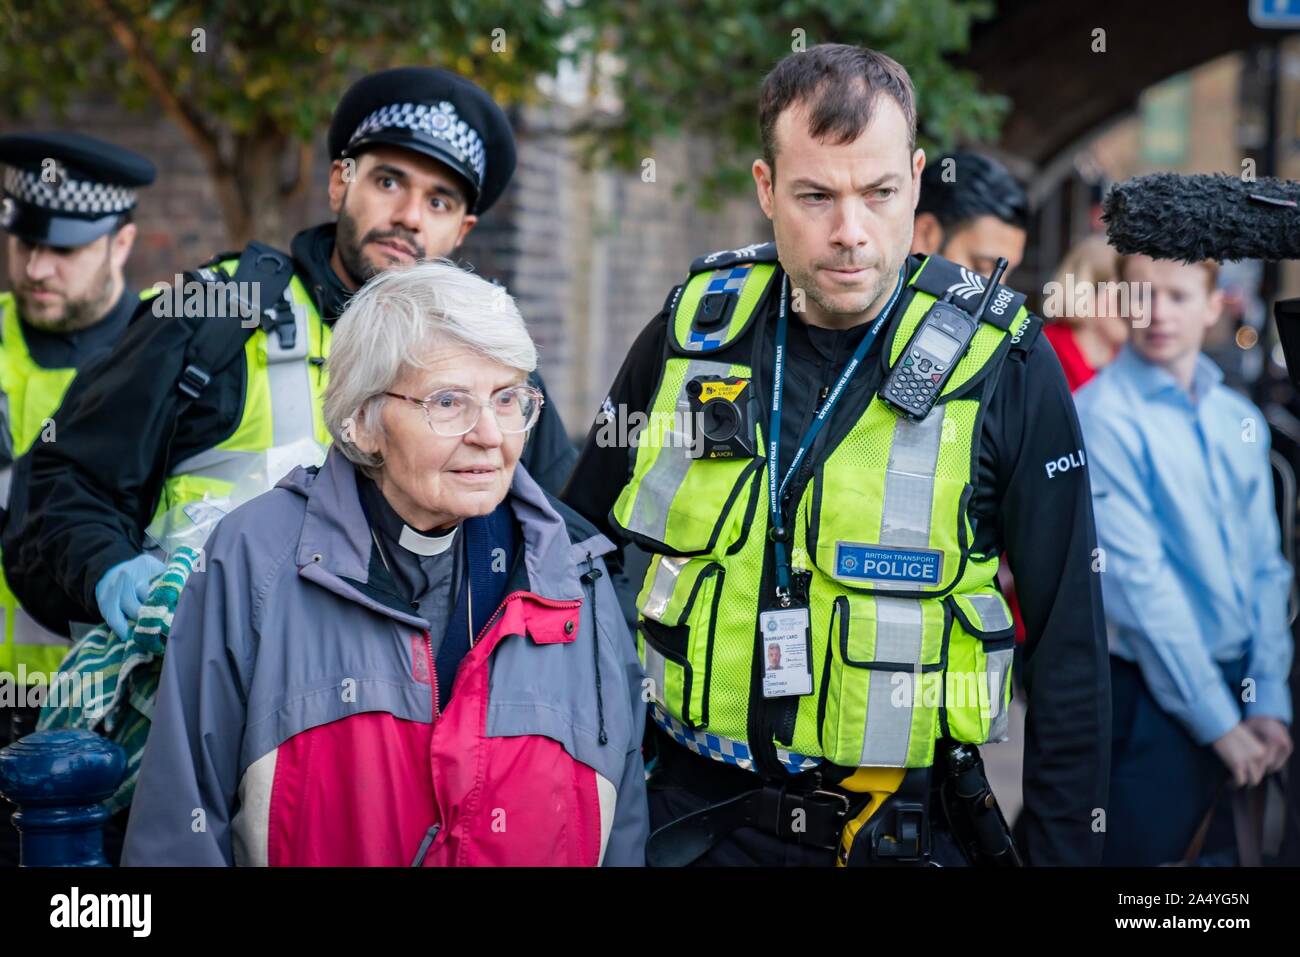 London, UK. 17th Oct, 2019. Member of Christian Climate Action - Rev. Sue Parfitt (77, from Bristol) arrested after climbing on the roof of a DLR train at Shadwell station during the Extinction Rebellion protests in central London, UK. Credit: Vladimir Morozov/Alamy Live News Stock Photo